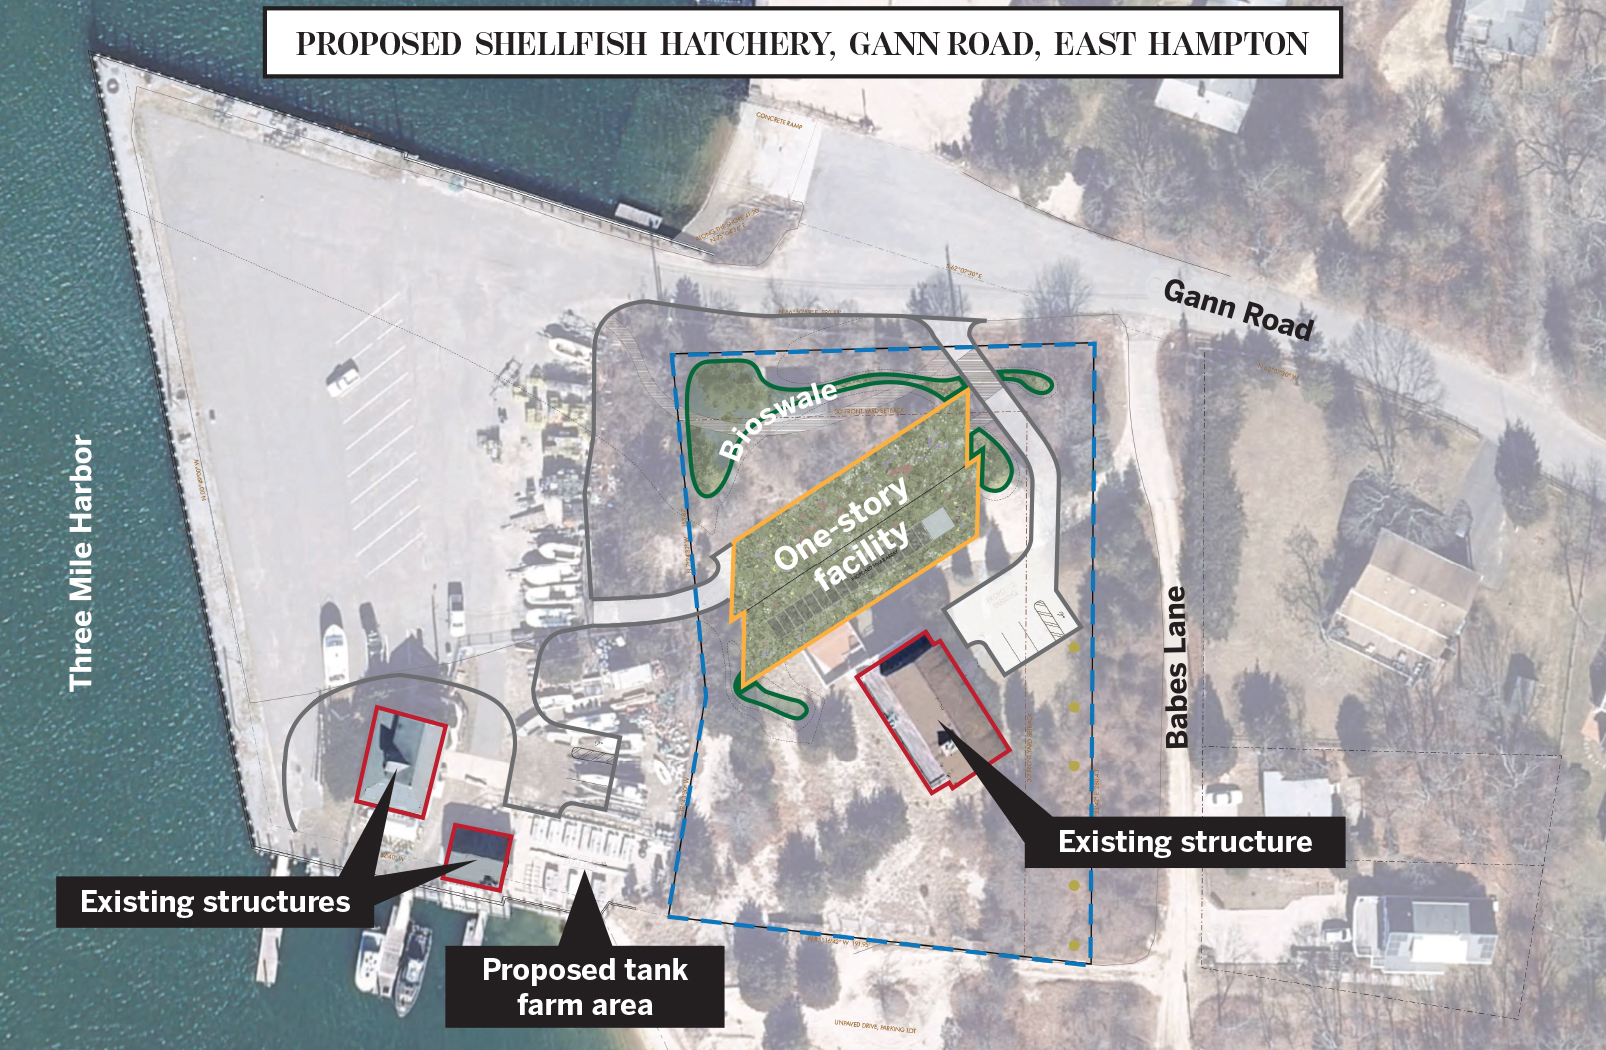 The town's plans for the Gann Road property call for linking the new hatchery facility to the existing town parking lot and hatchery operations. 